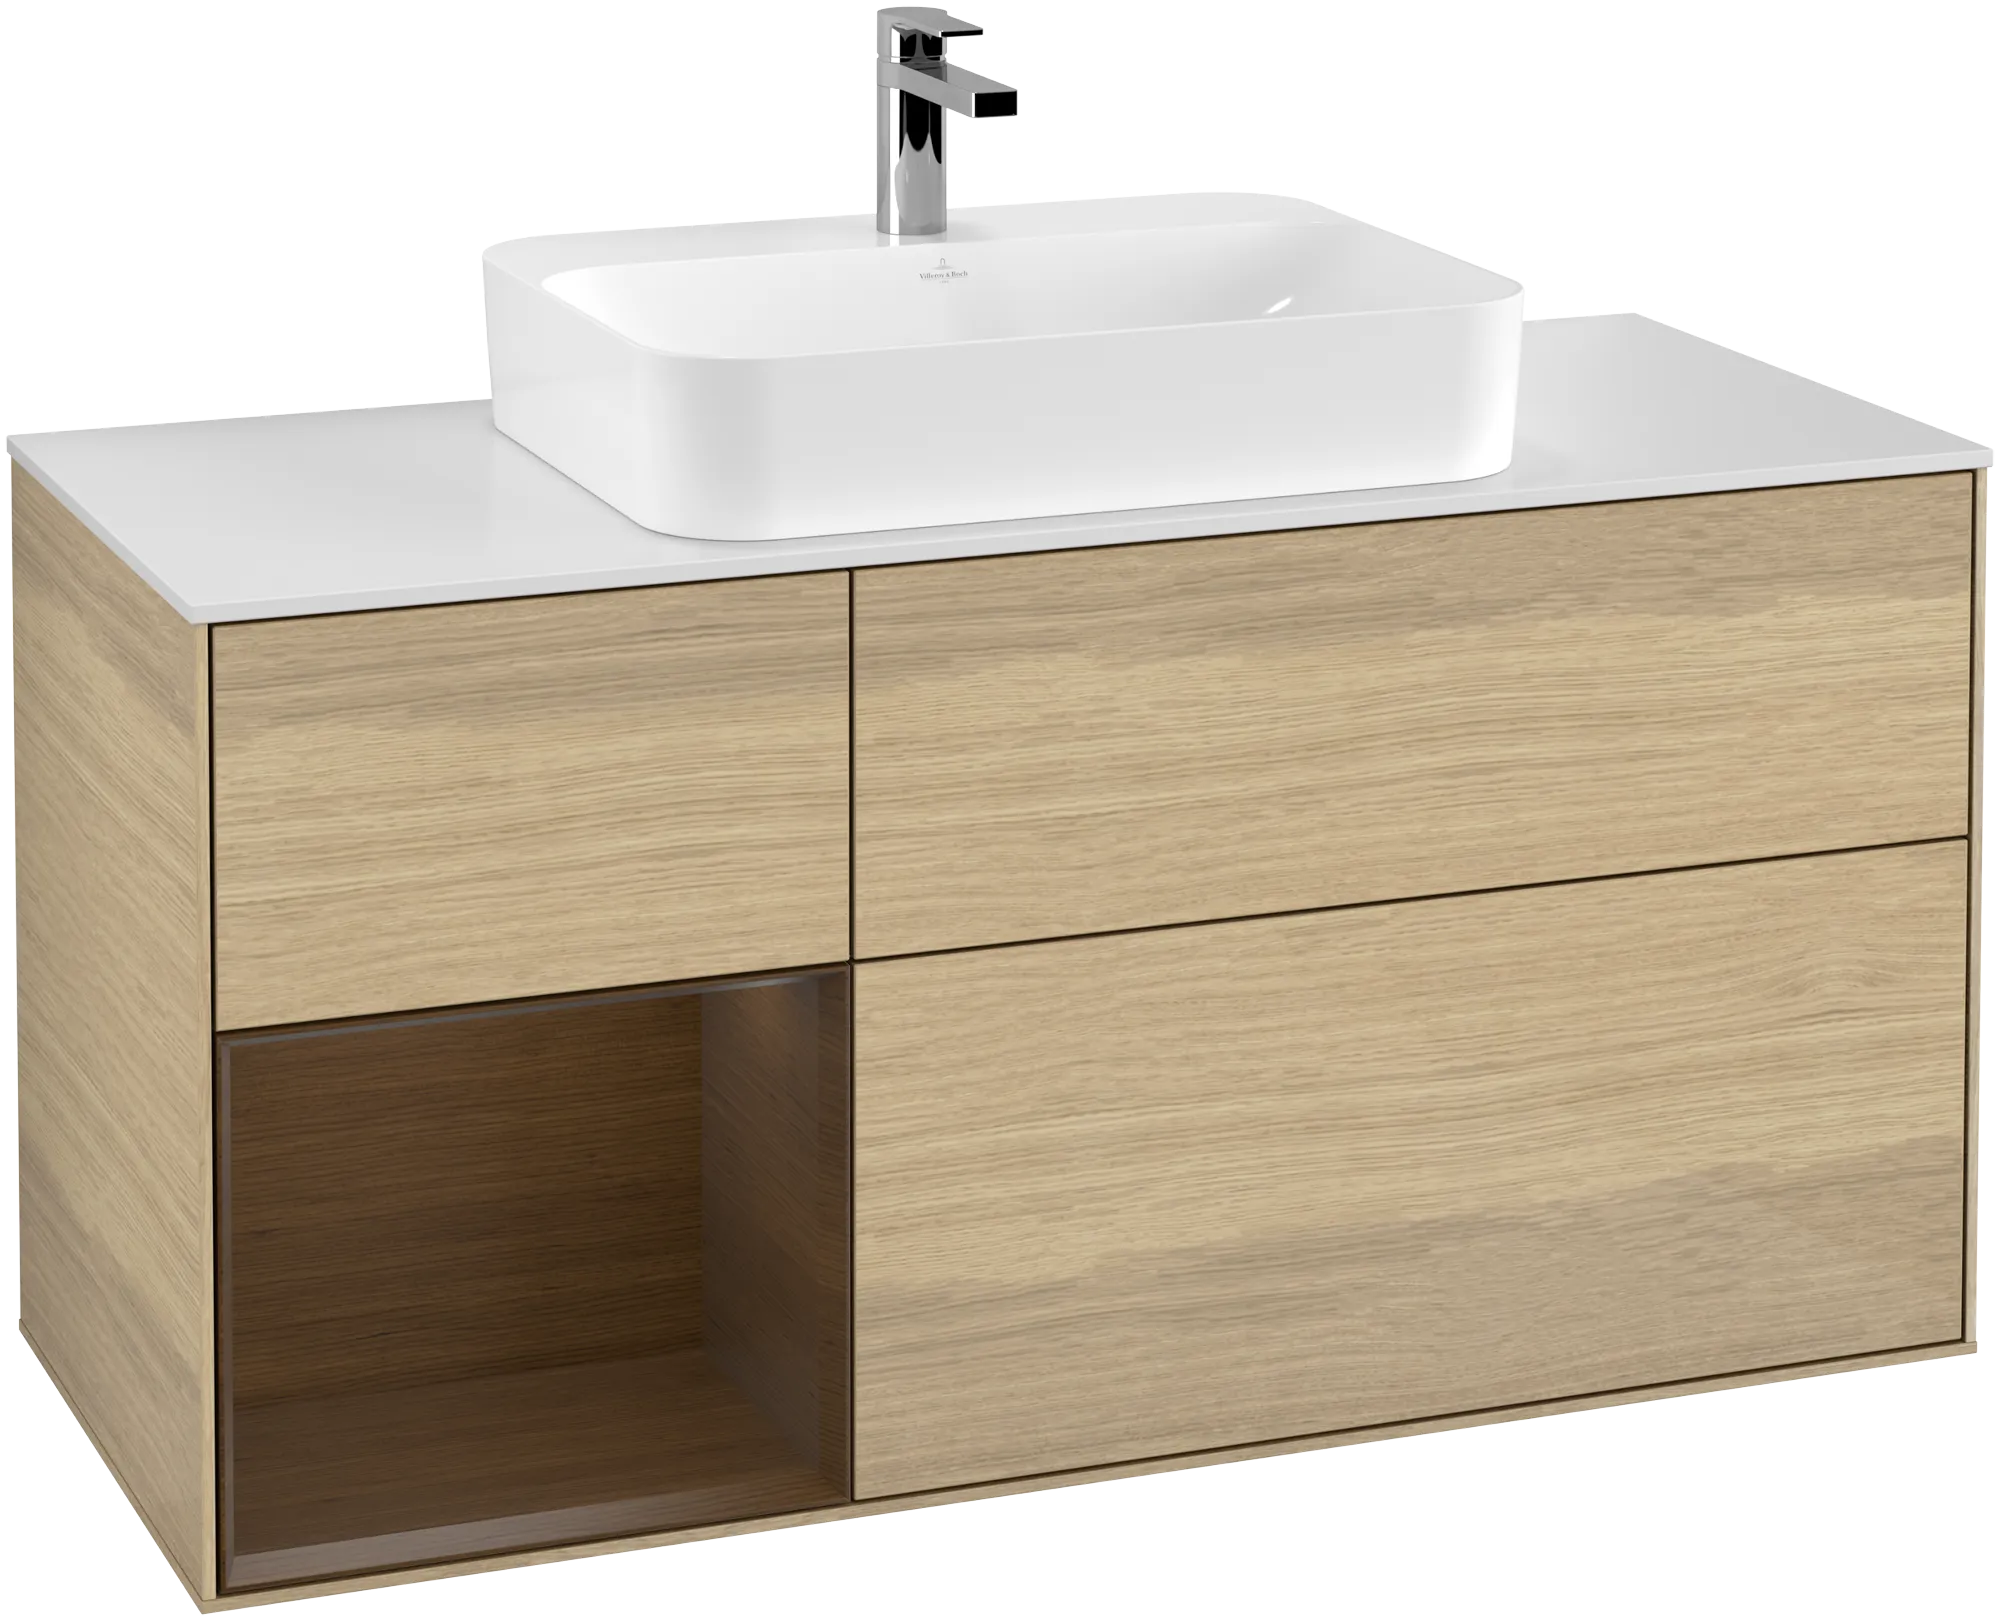 Picture of VILLEROY BOCH Finion Vanity unit, with lighting, 3 pull-out compartments, 1200 x 603 x 501 mm, Oak Veneer / Walnut Veneer / Glass White Matt #G411GNPC